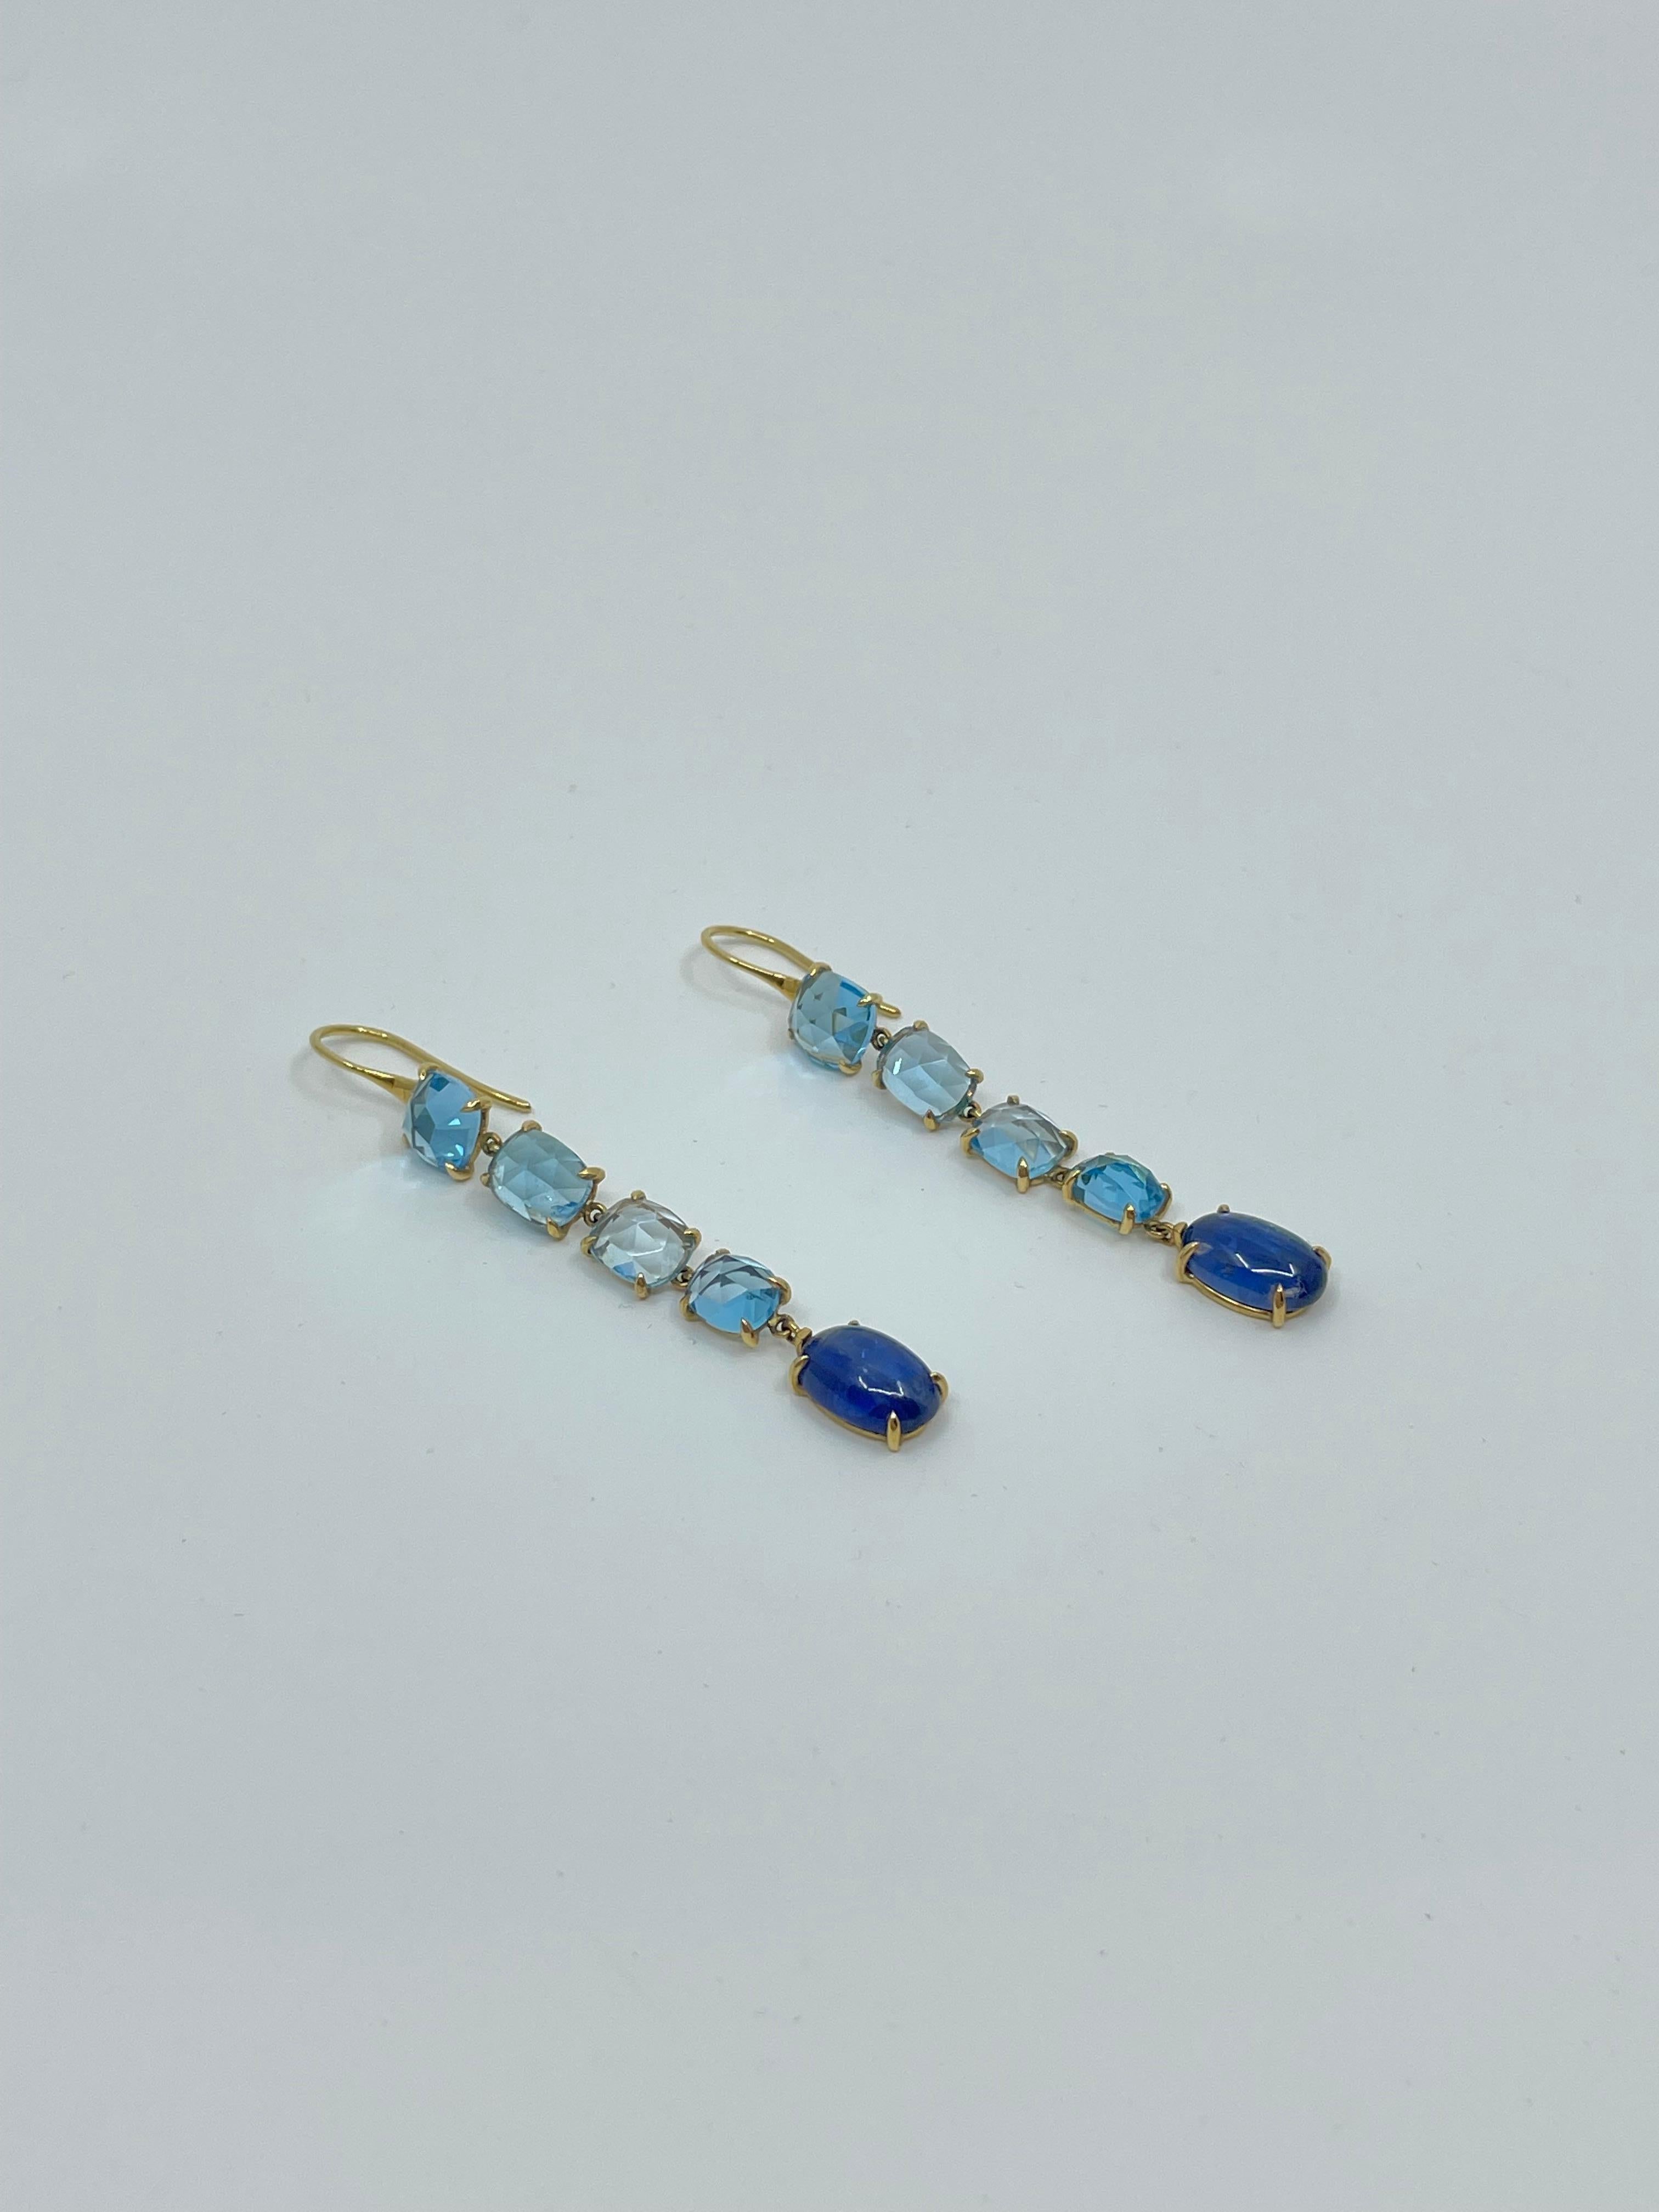 Drop Earrings with Kyanite, Blue Topaz & Gold For Sale 2